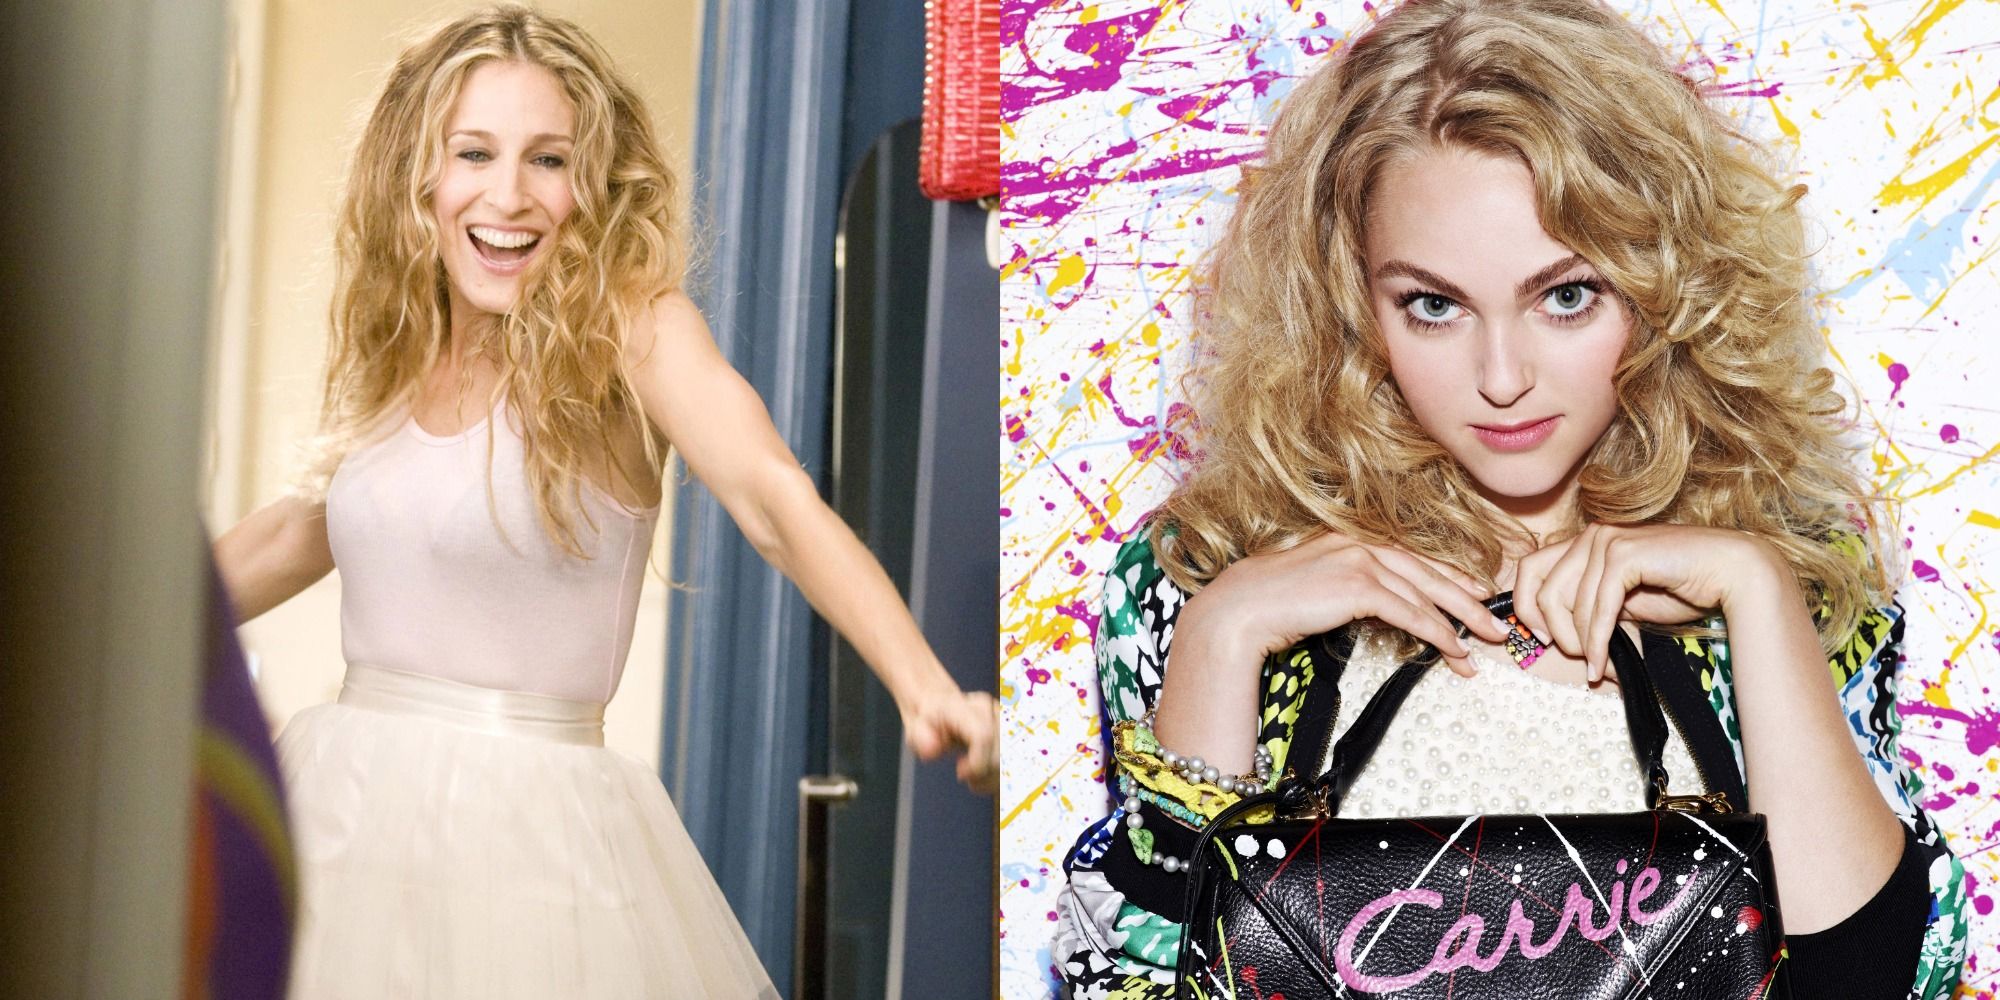 Split image showing Carrie in SatC and The Carrie Diaries